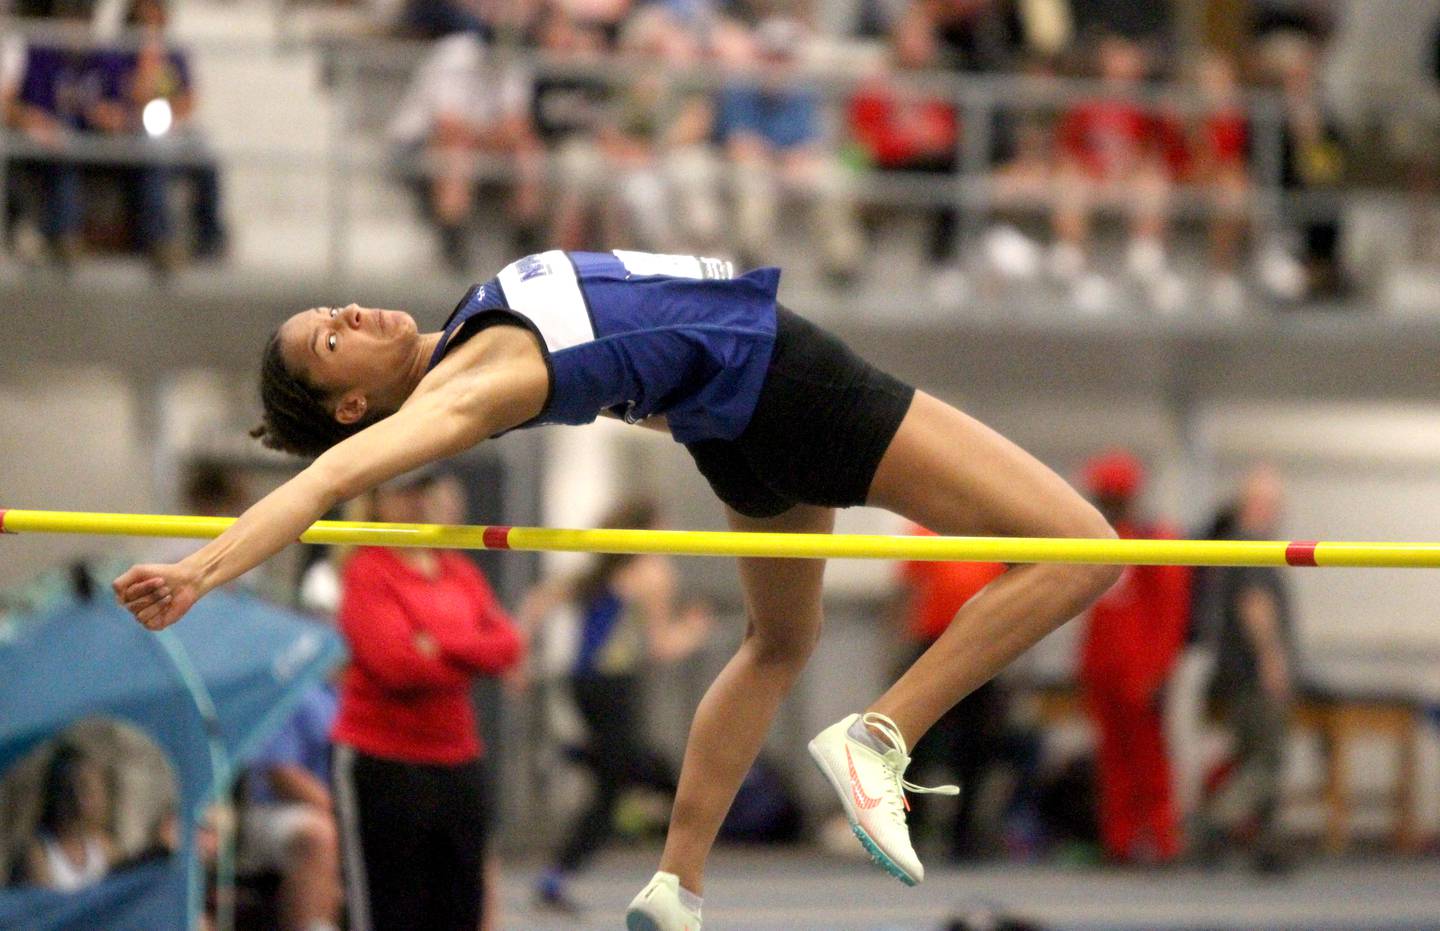 Newark’s Kiara Wesseh competes in the 1A high jump finals during the IHSA Girls State Championships in Charleston on Saturday, May 21, 2022.